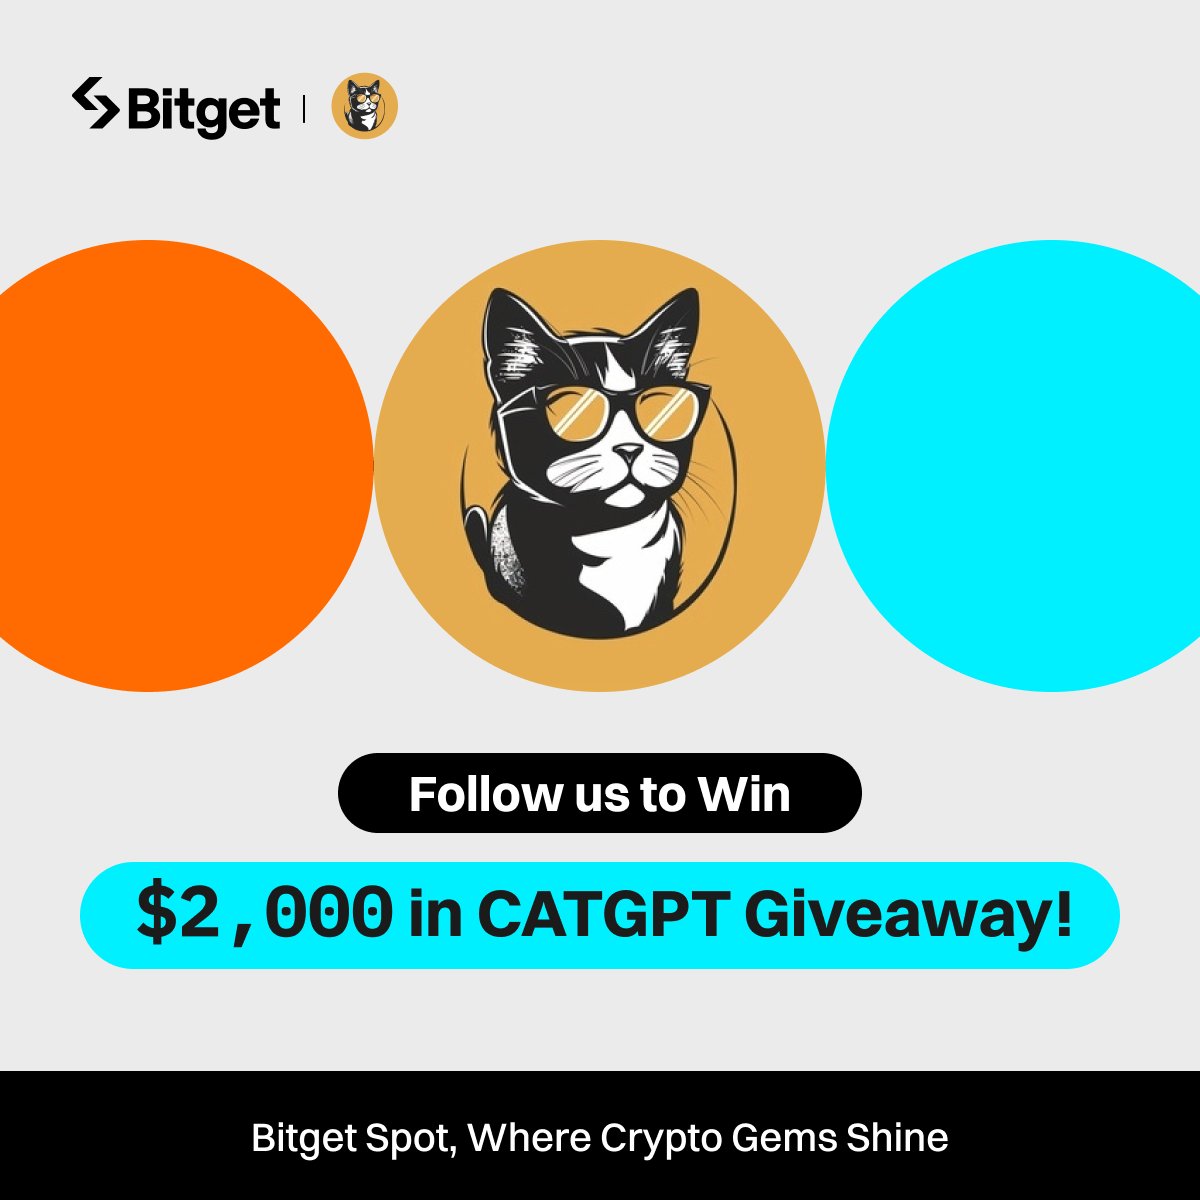 💰 $2,000 GIVEAWAY 💰 We're giving away $2,000 worth of $CATGPT to celebrate the listing! 1⃣ Follow @bitgetglobal @CATGPT_MeMe 2⃣ Repost with #CATGPTlistBitget & tag your friends 3⃣ Fill out: forms.gle/P2Lrtqkxpz2Gnj… 🎁 40 winners * $50 worth of CATGPT